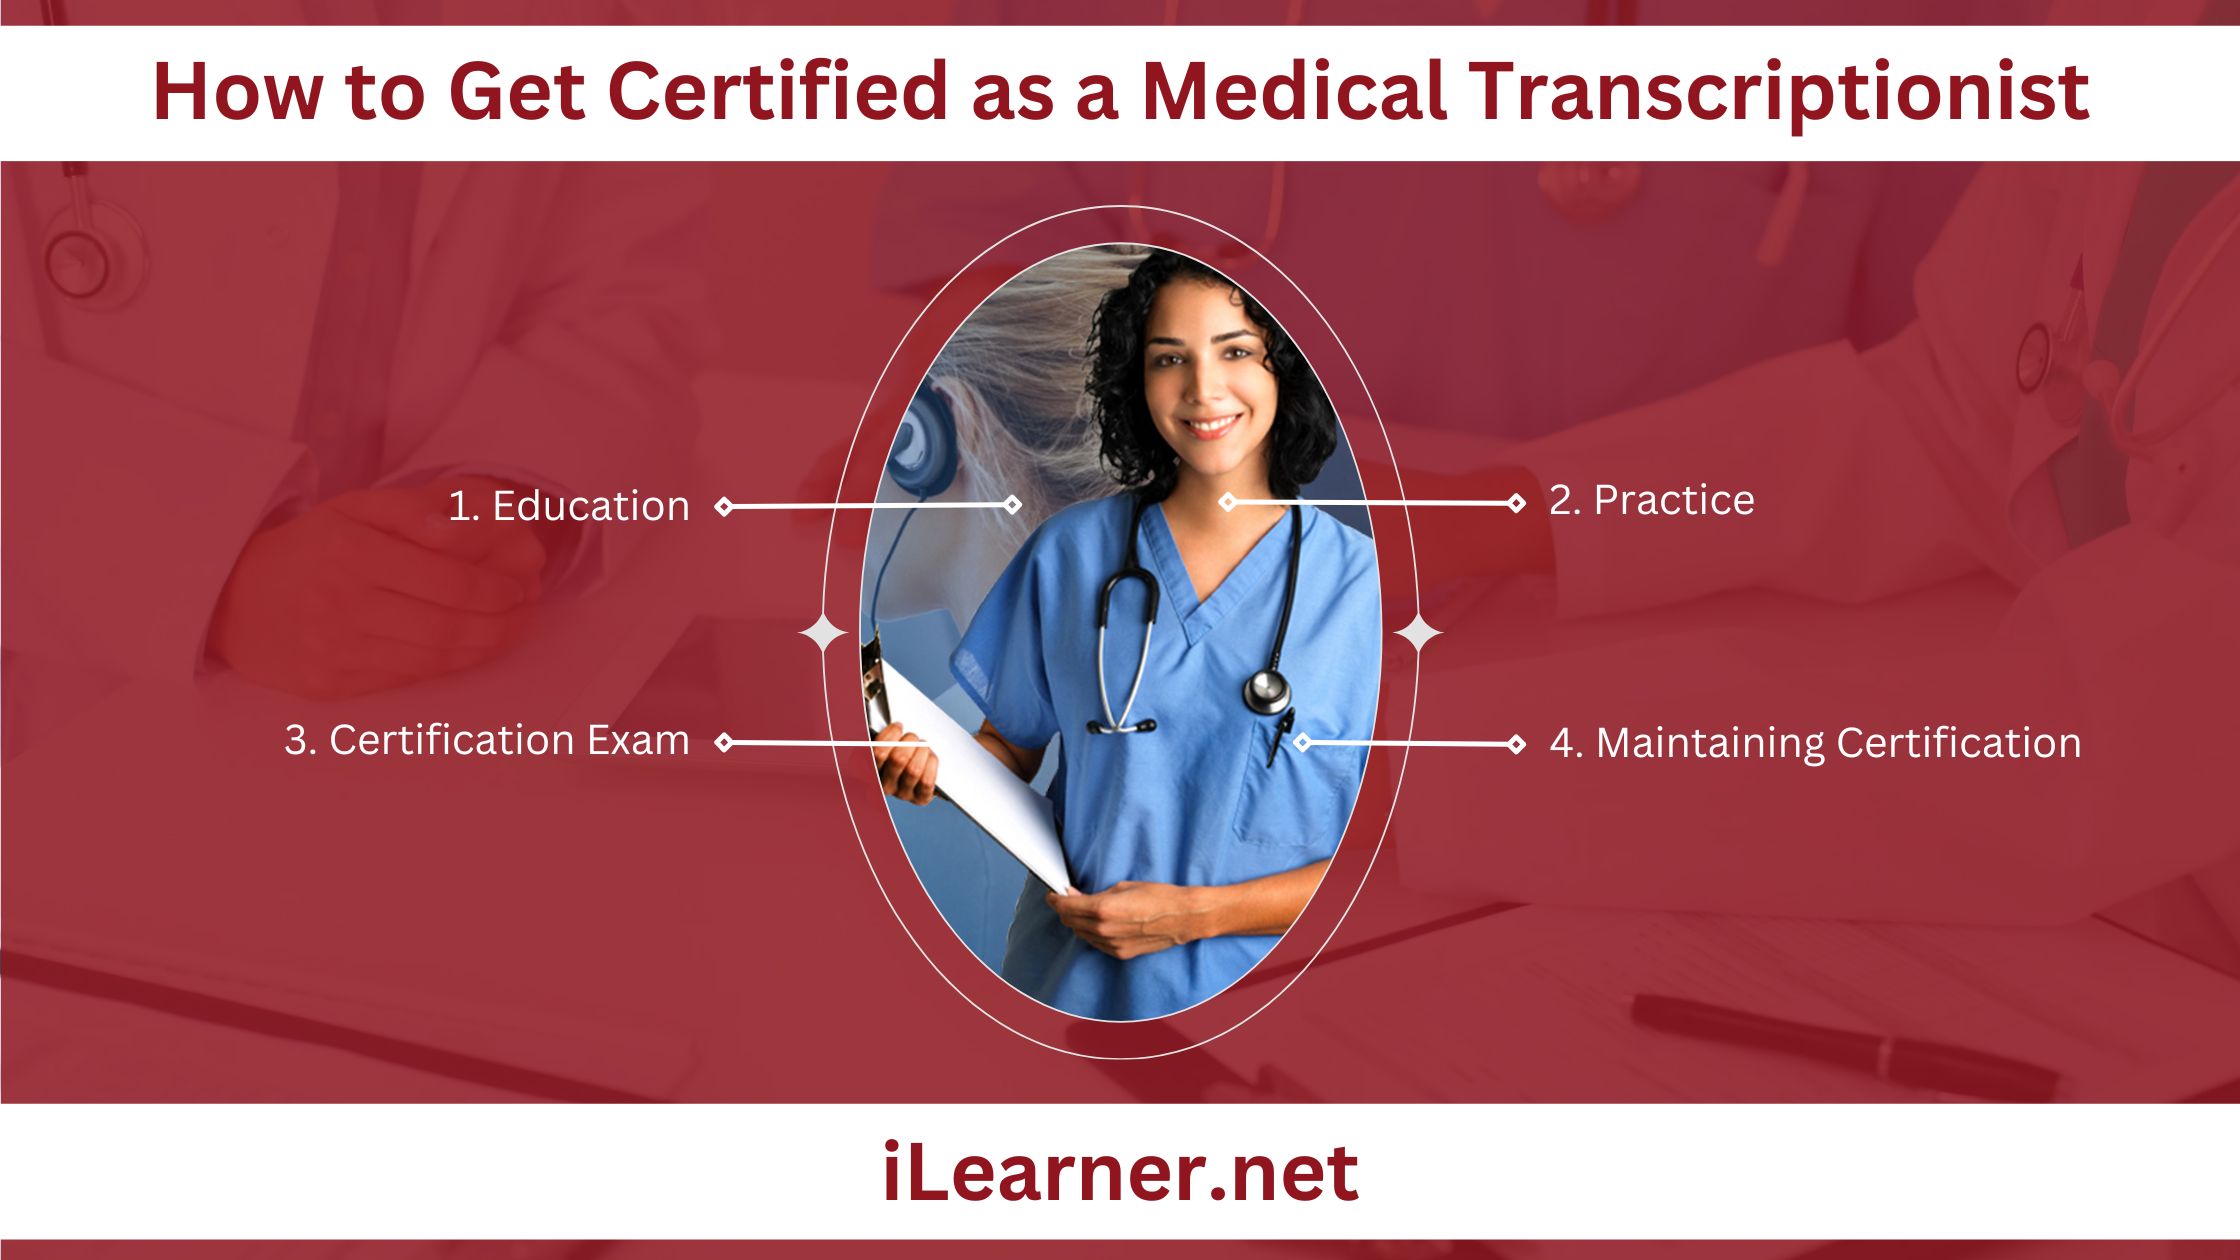 How to Get Certified as a Medical Transcriptionist - Infographic